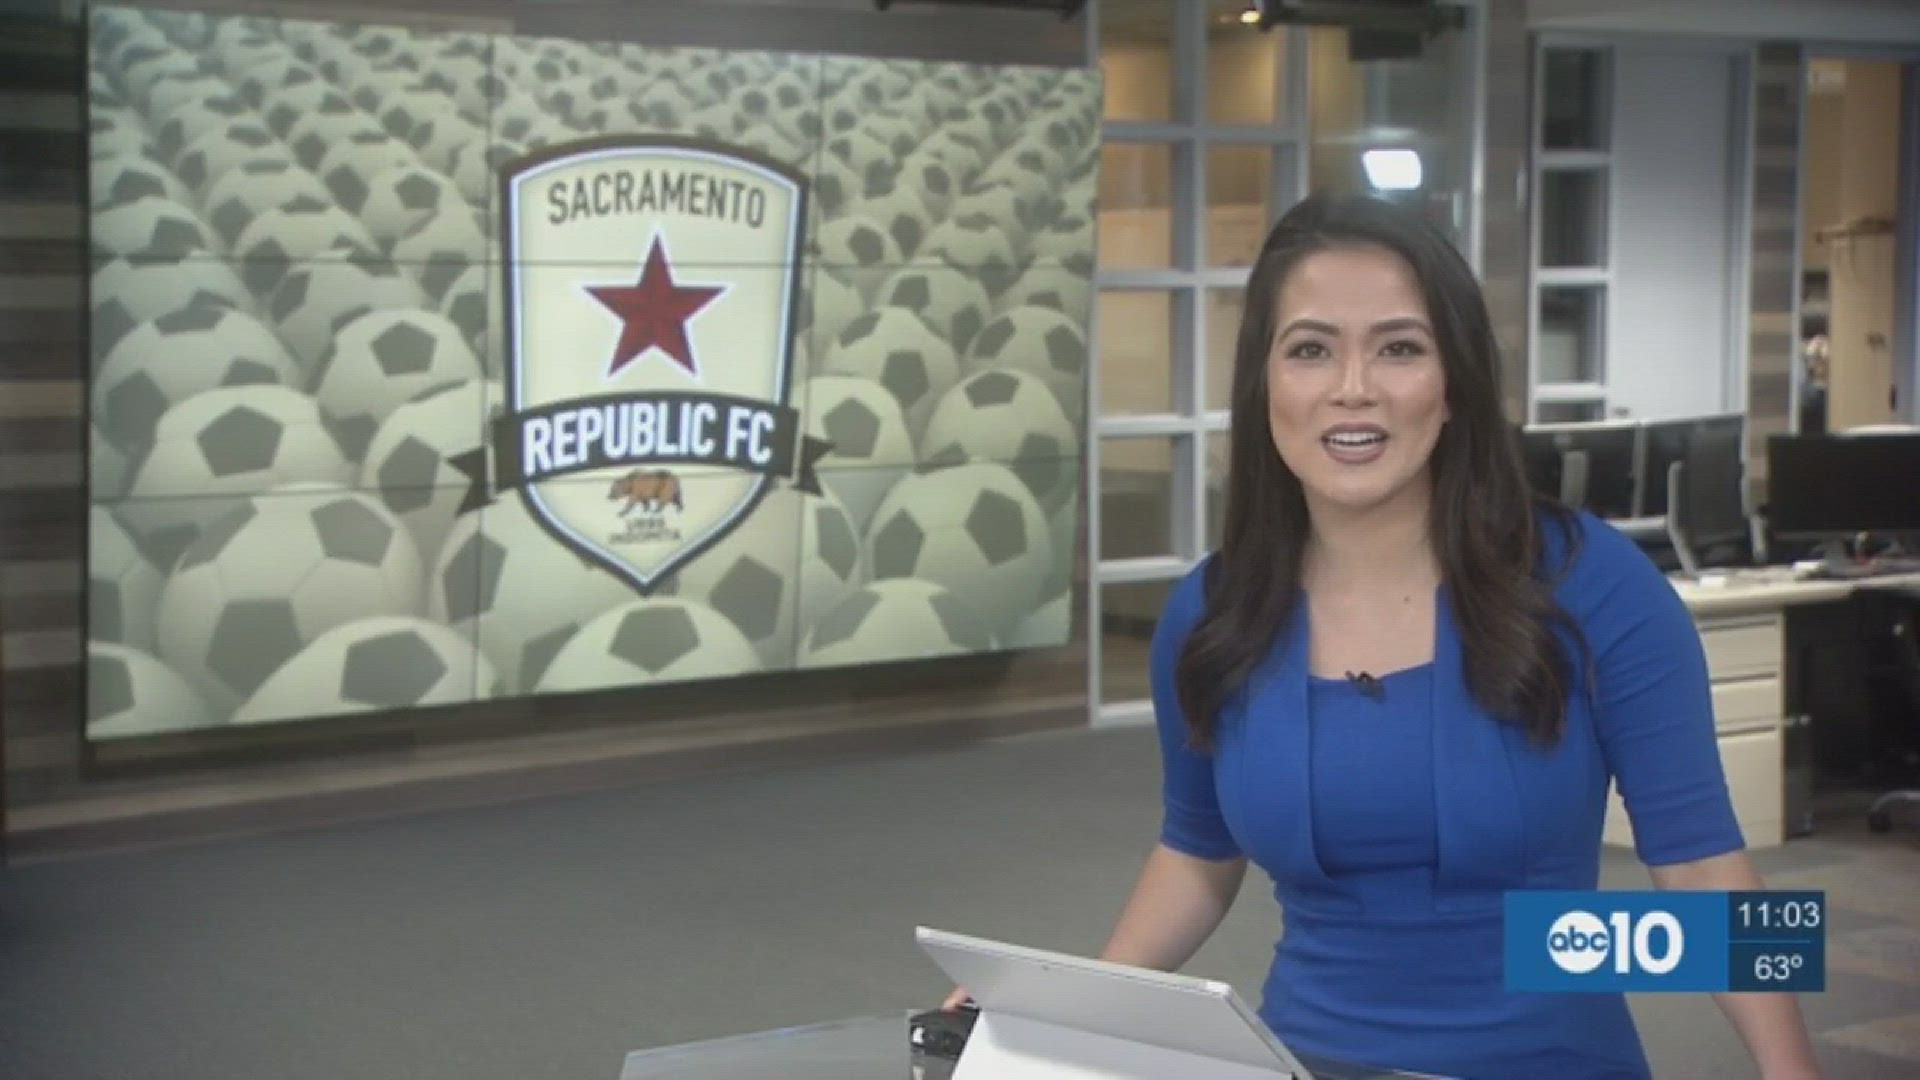 The Sacramento Republic FC defeated Orange County 4-0, in the home opener of Papa Murphy's Park in Sacramento